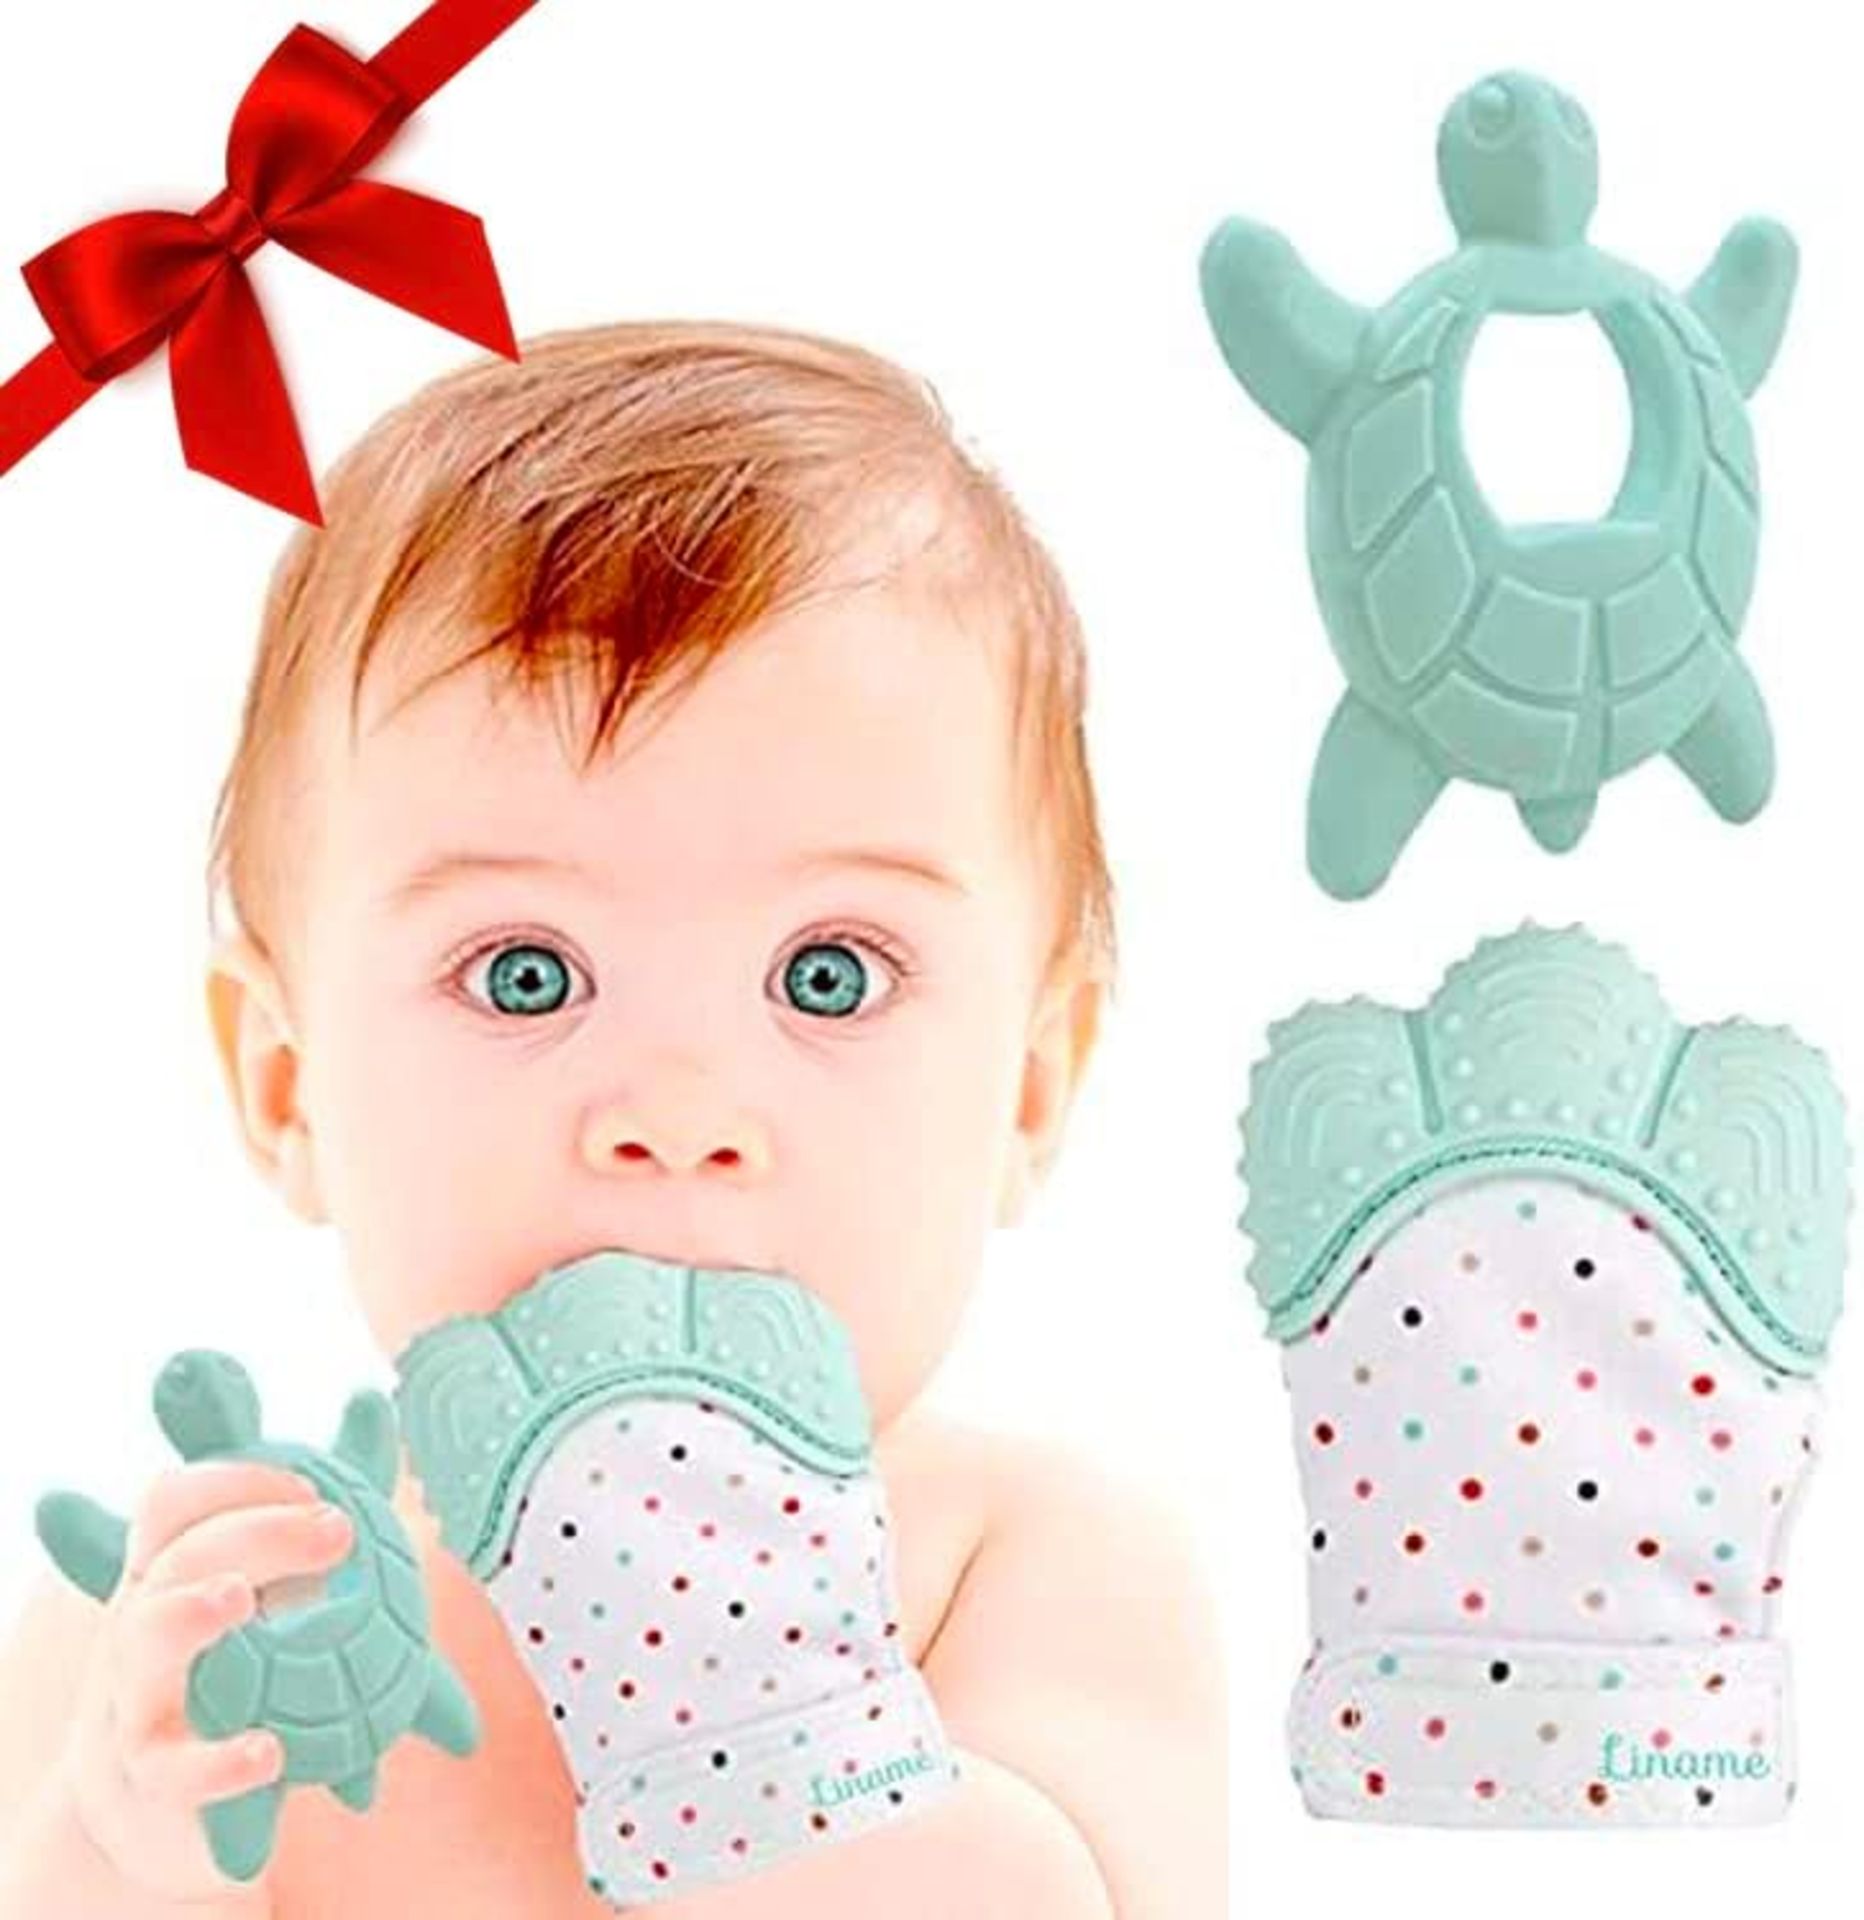 50 X BRAND NEW LINAME MINT PREMIUM TEETHING KITS INCLUDING TEETHING TOY AND TEETHING MITTEN R10-4